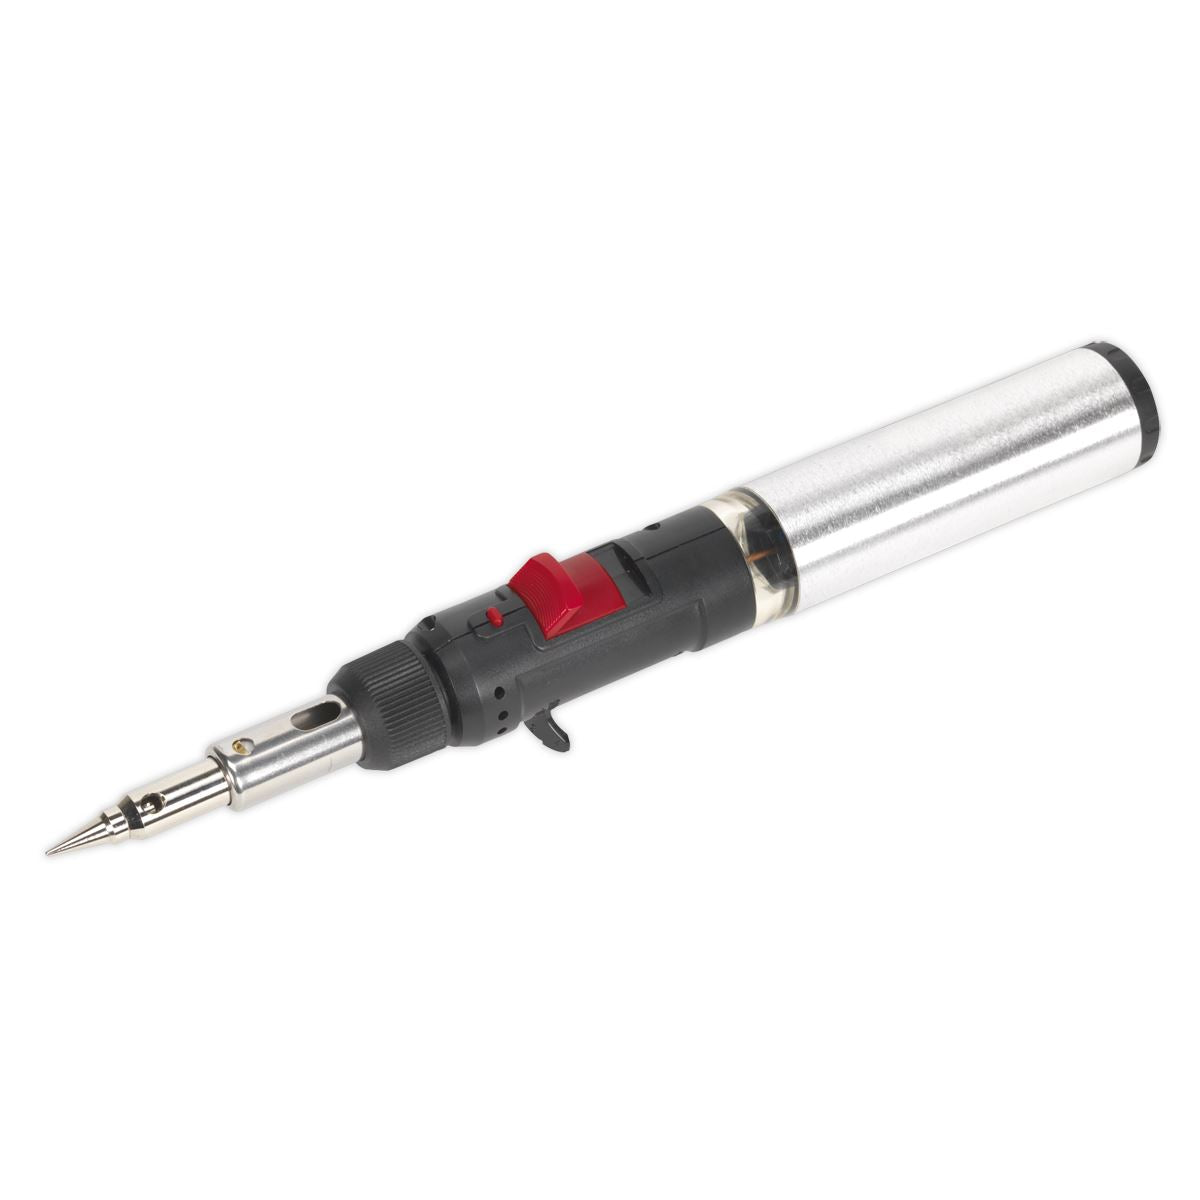 Sealey Premier Professional Soldering/Heating Torch